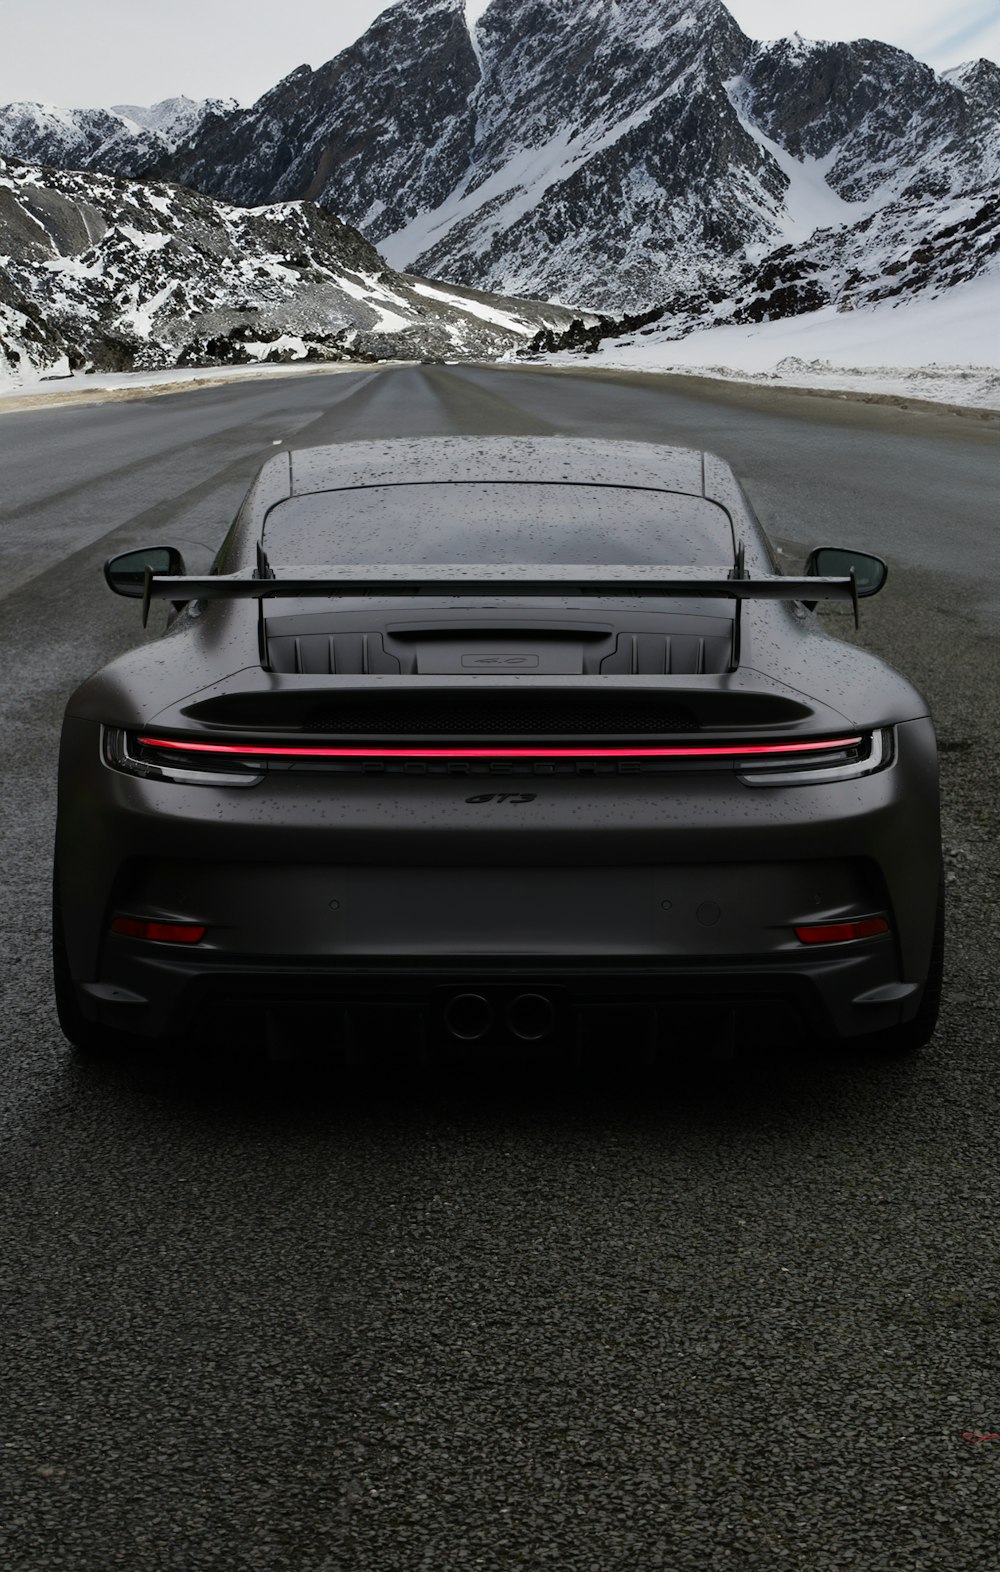 the rear end of a black sports car